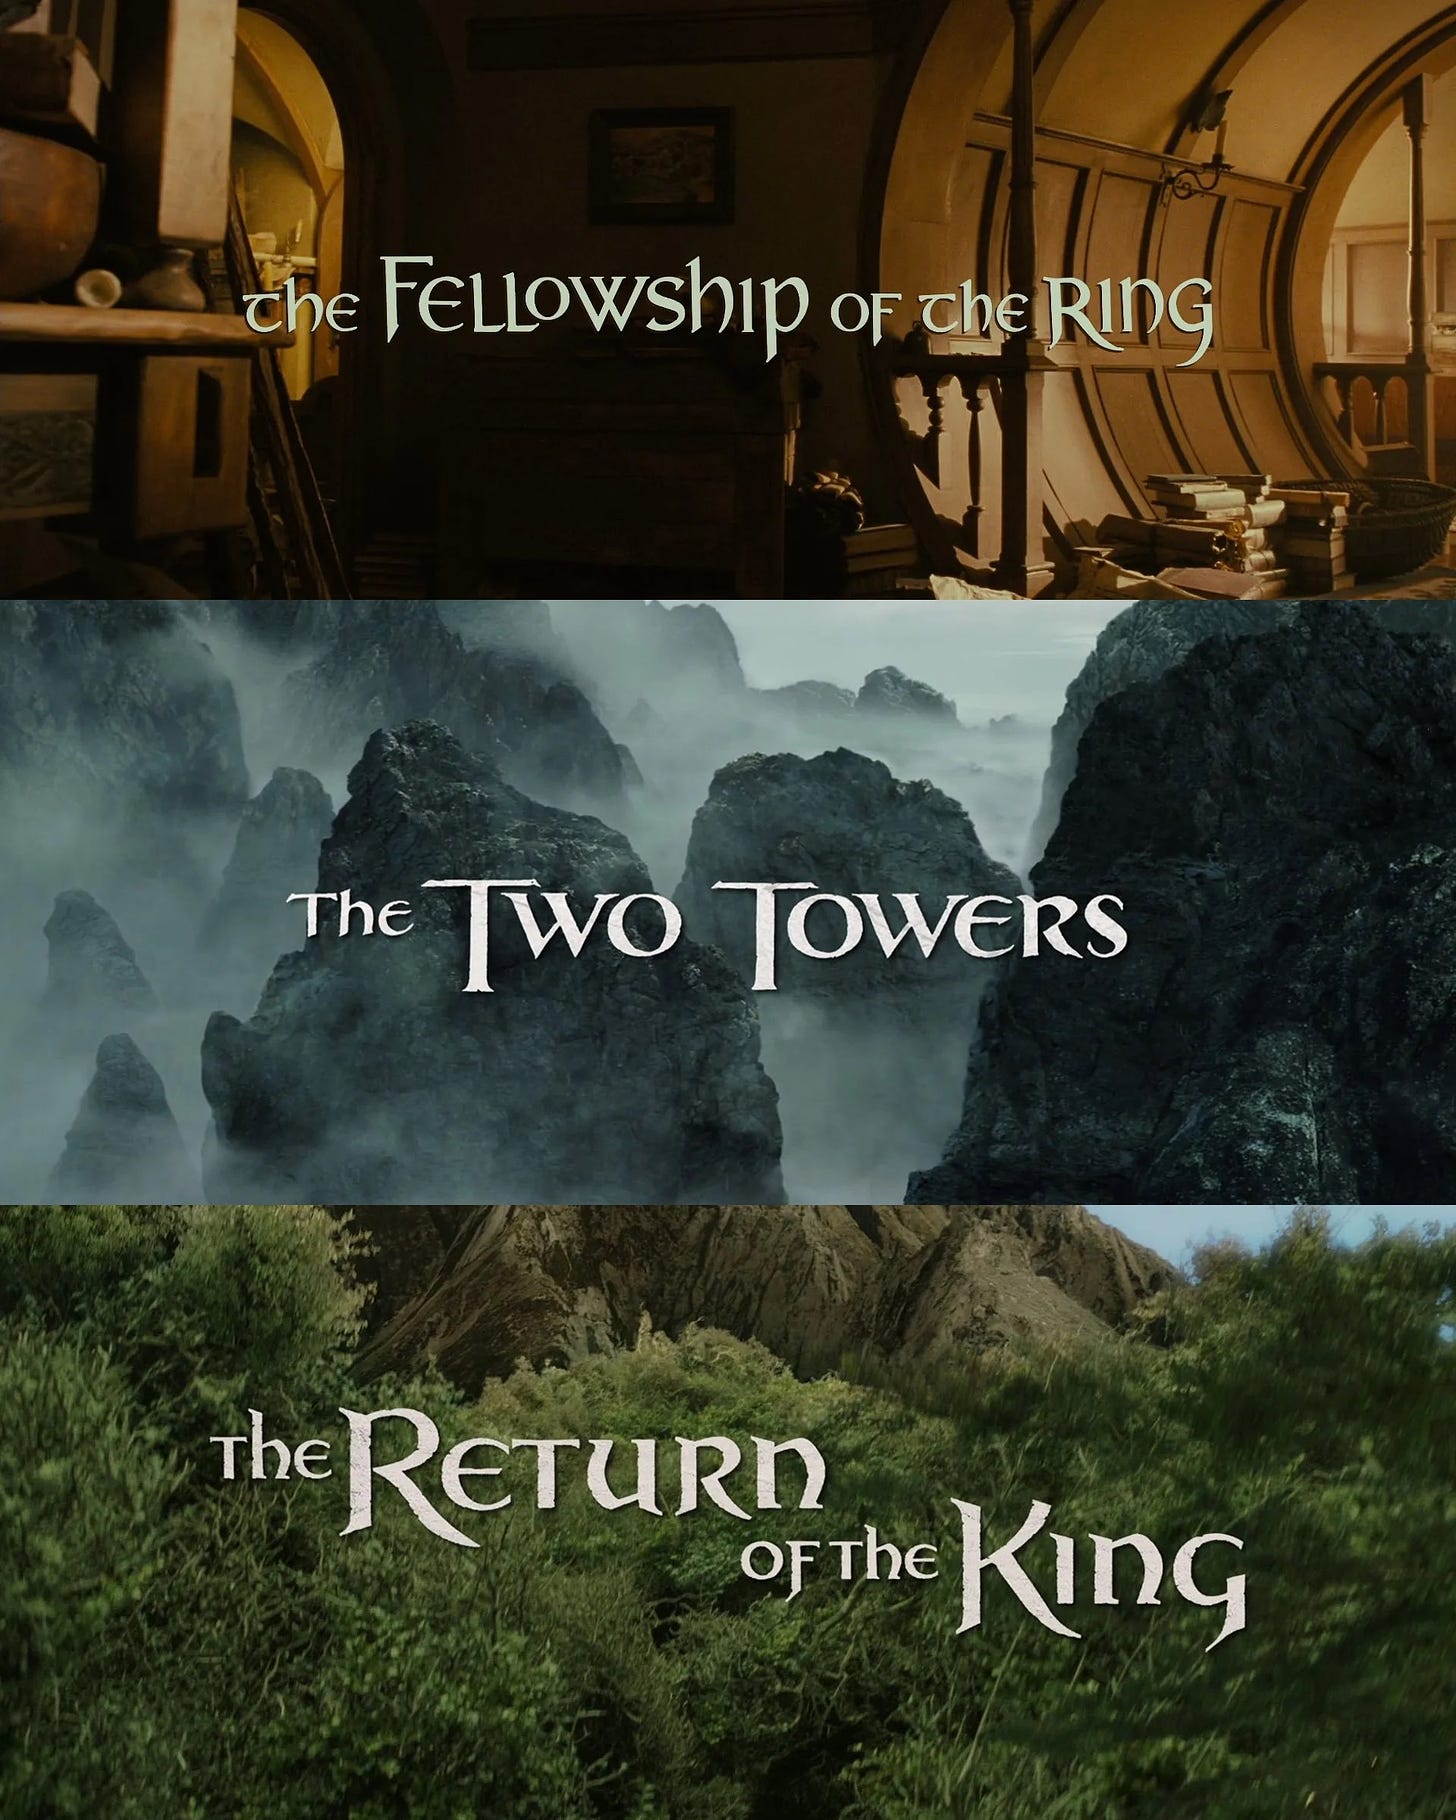 the title cards from the extended editions of the lord of the rings